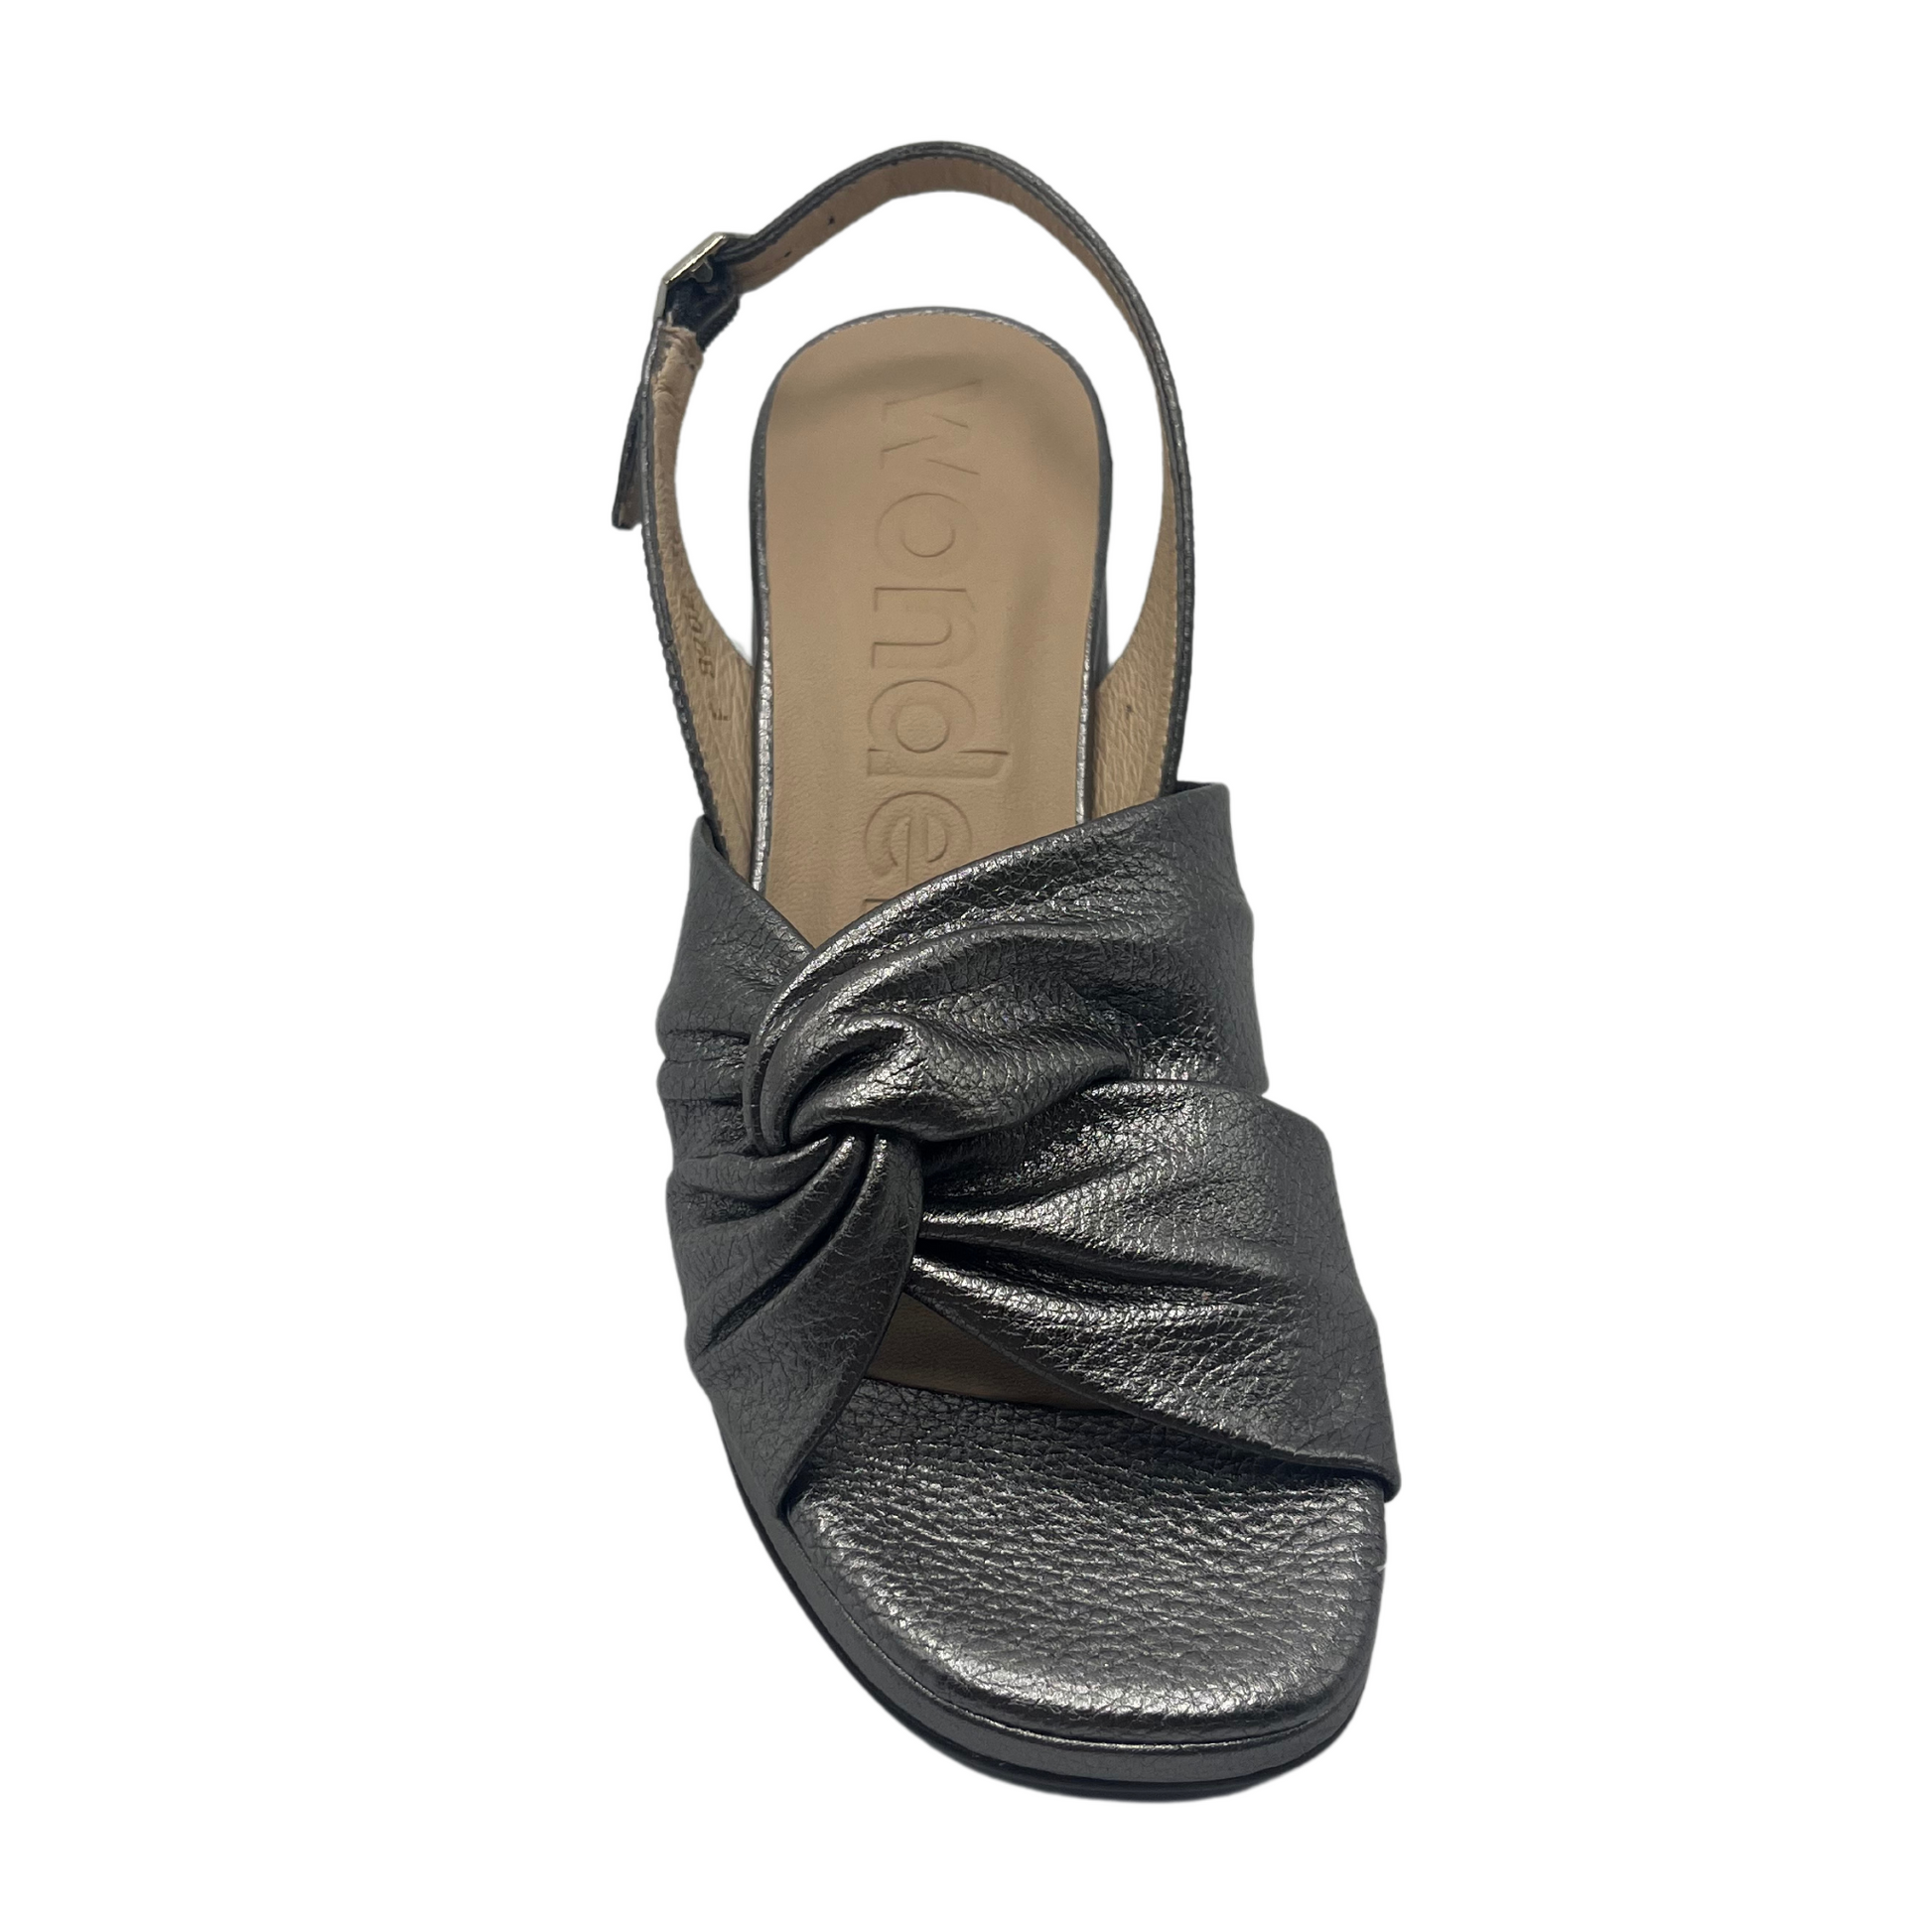 Top view of metallic silver leather sandal with square toe and buckle strap